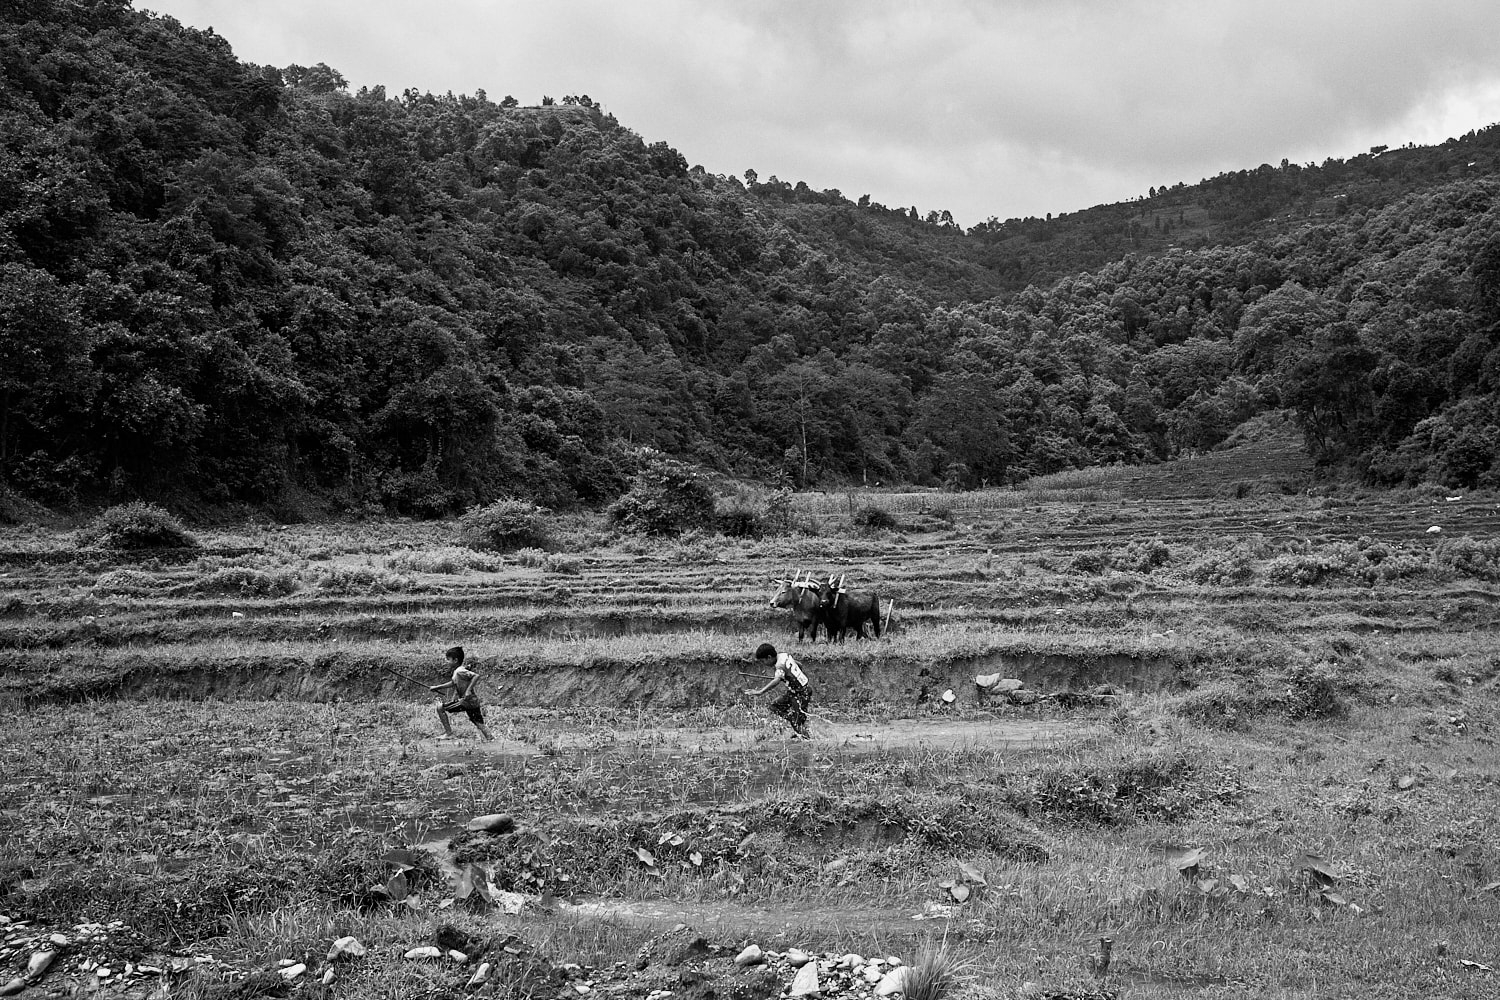 Kids play in a rice field in Leknath as bullocks rest in the background